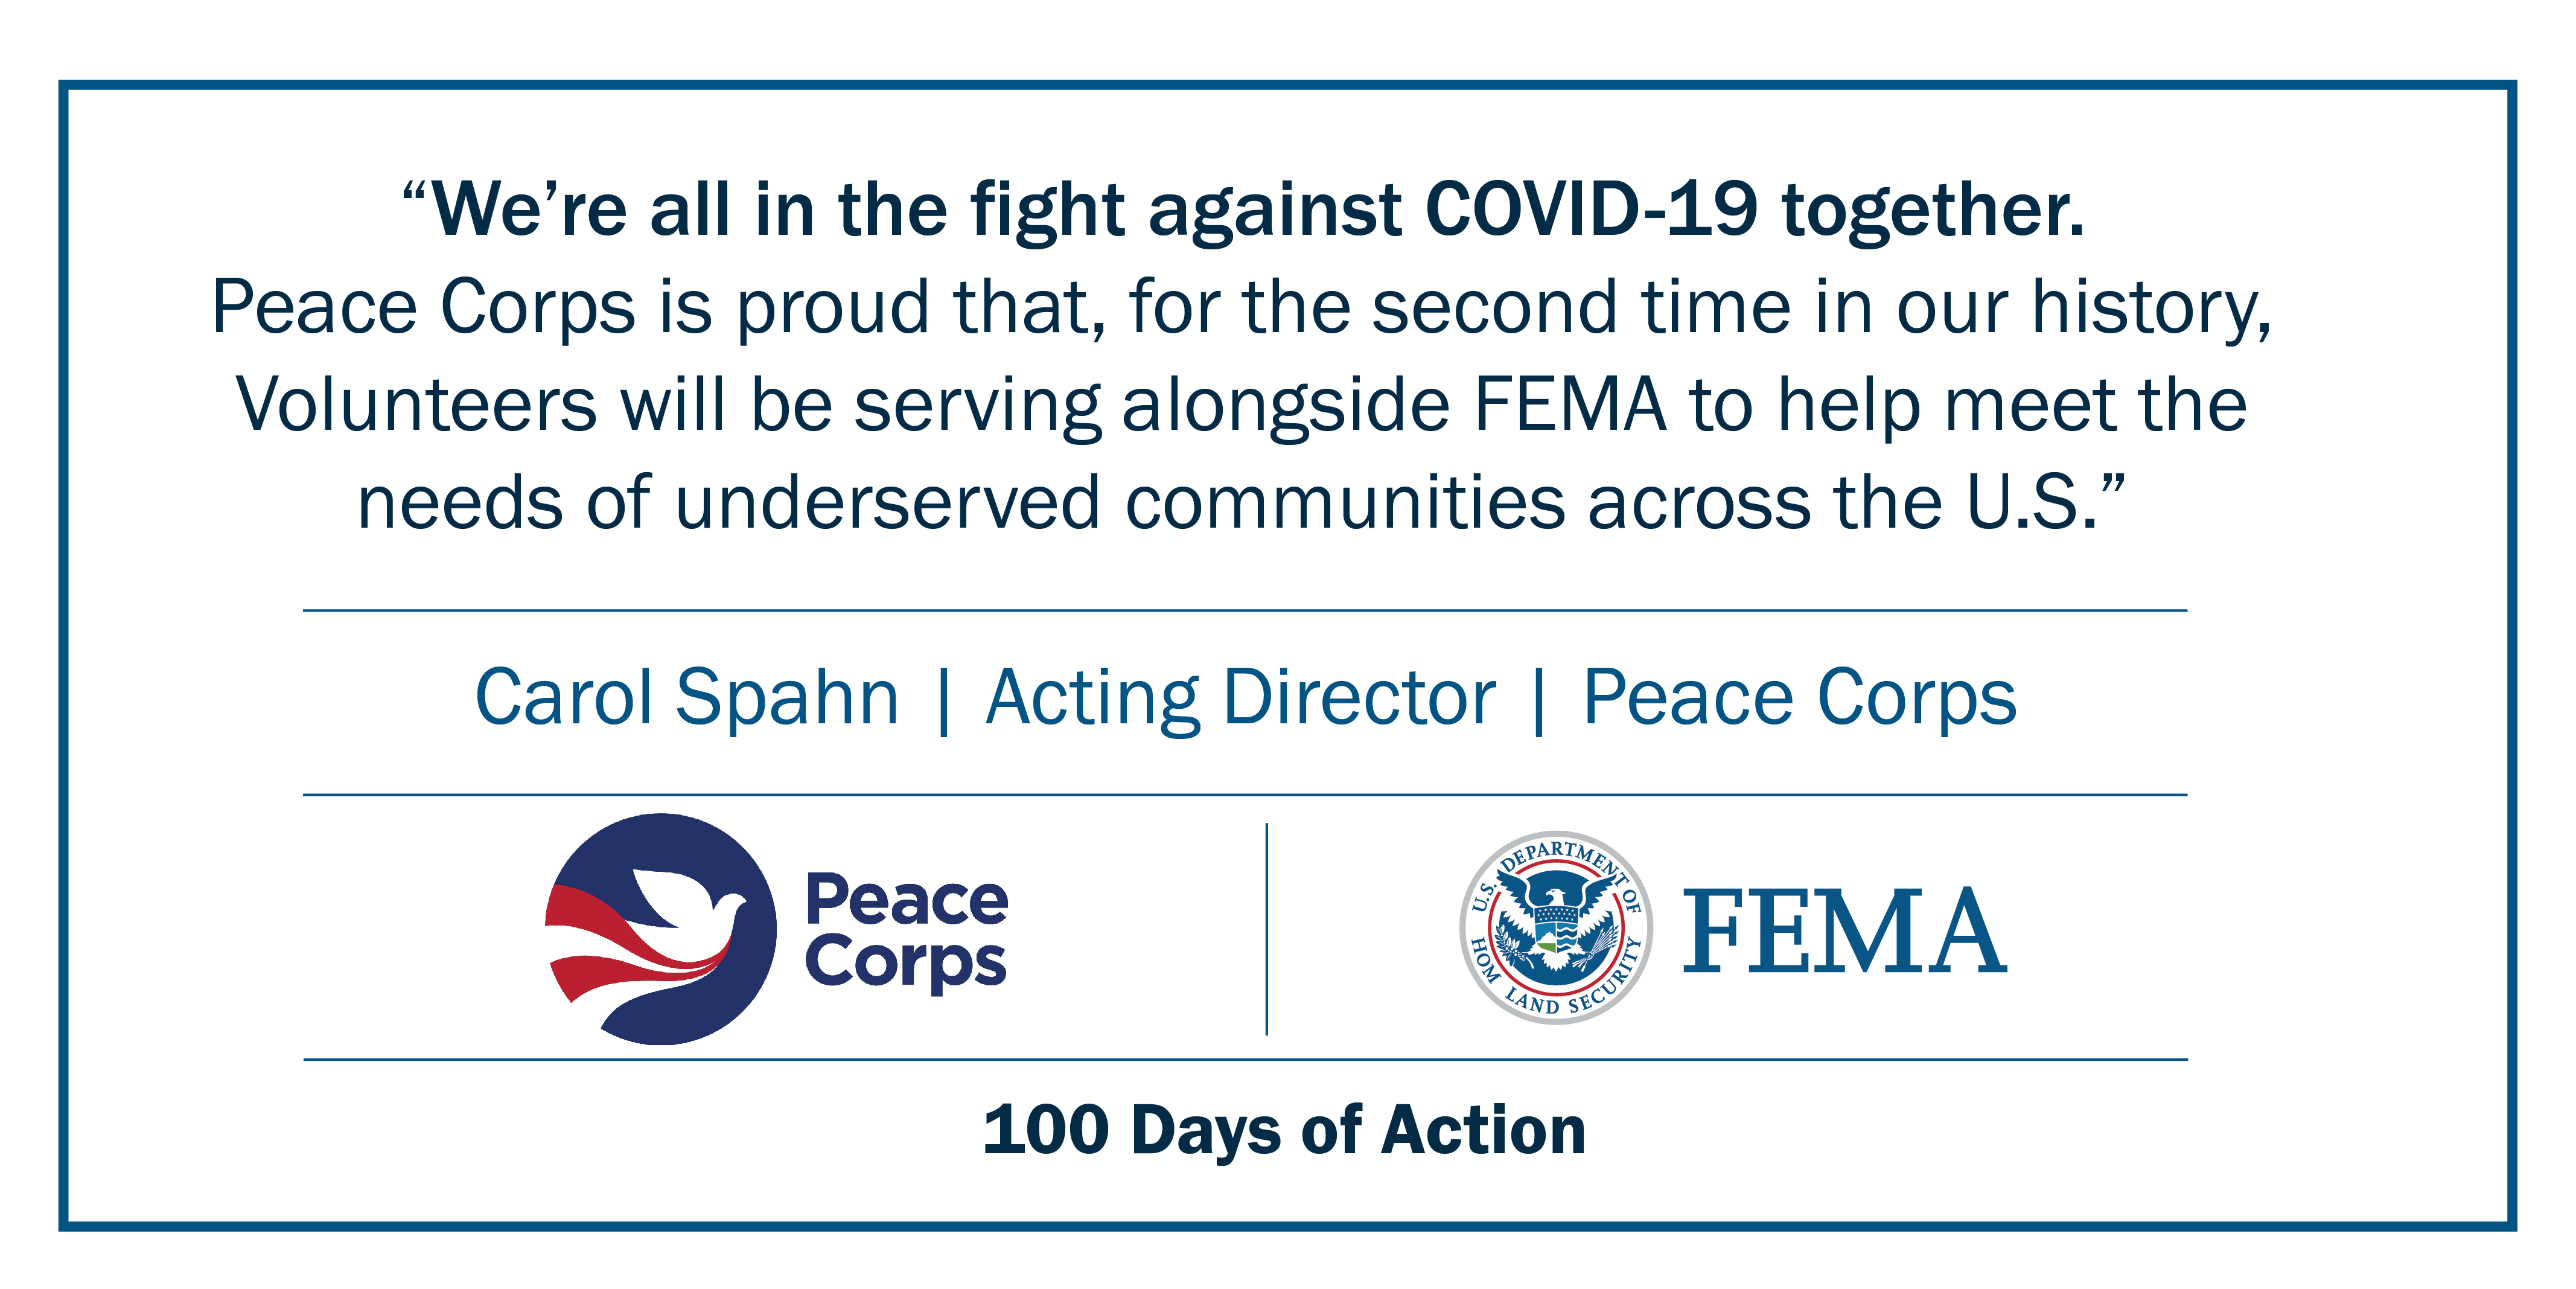 “We’re all in the fight against COVID-19 together. Peace Corps is proud that, for the second time in our history, Volunteers will be serving alongside FEMA to help meet the needs of underserved communities across the U.S.”